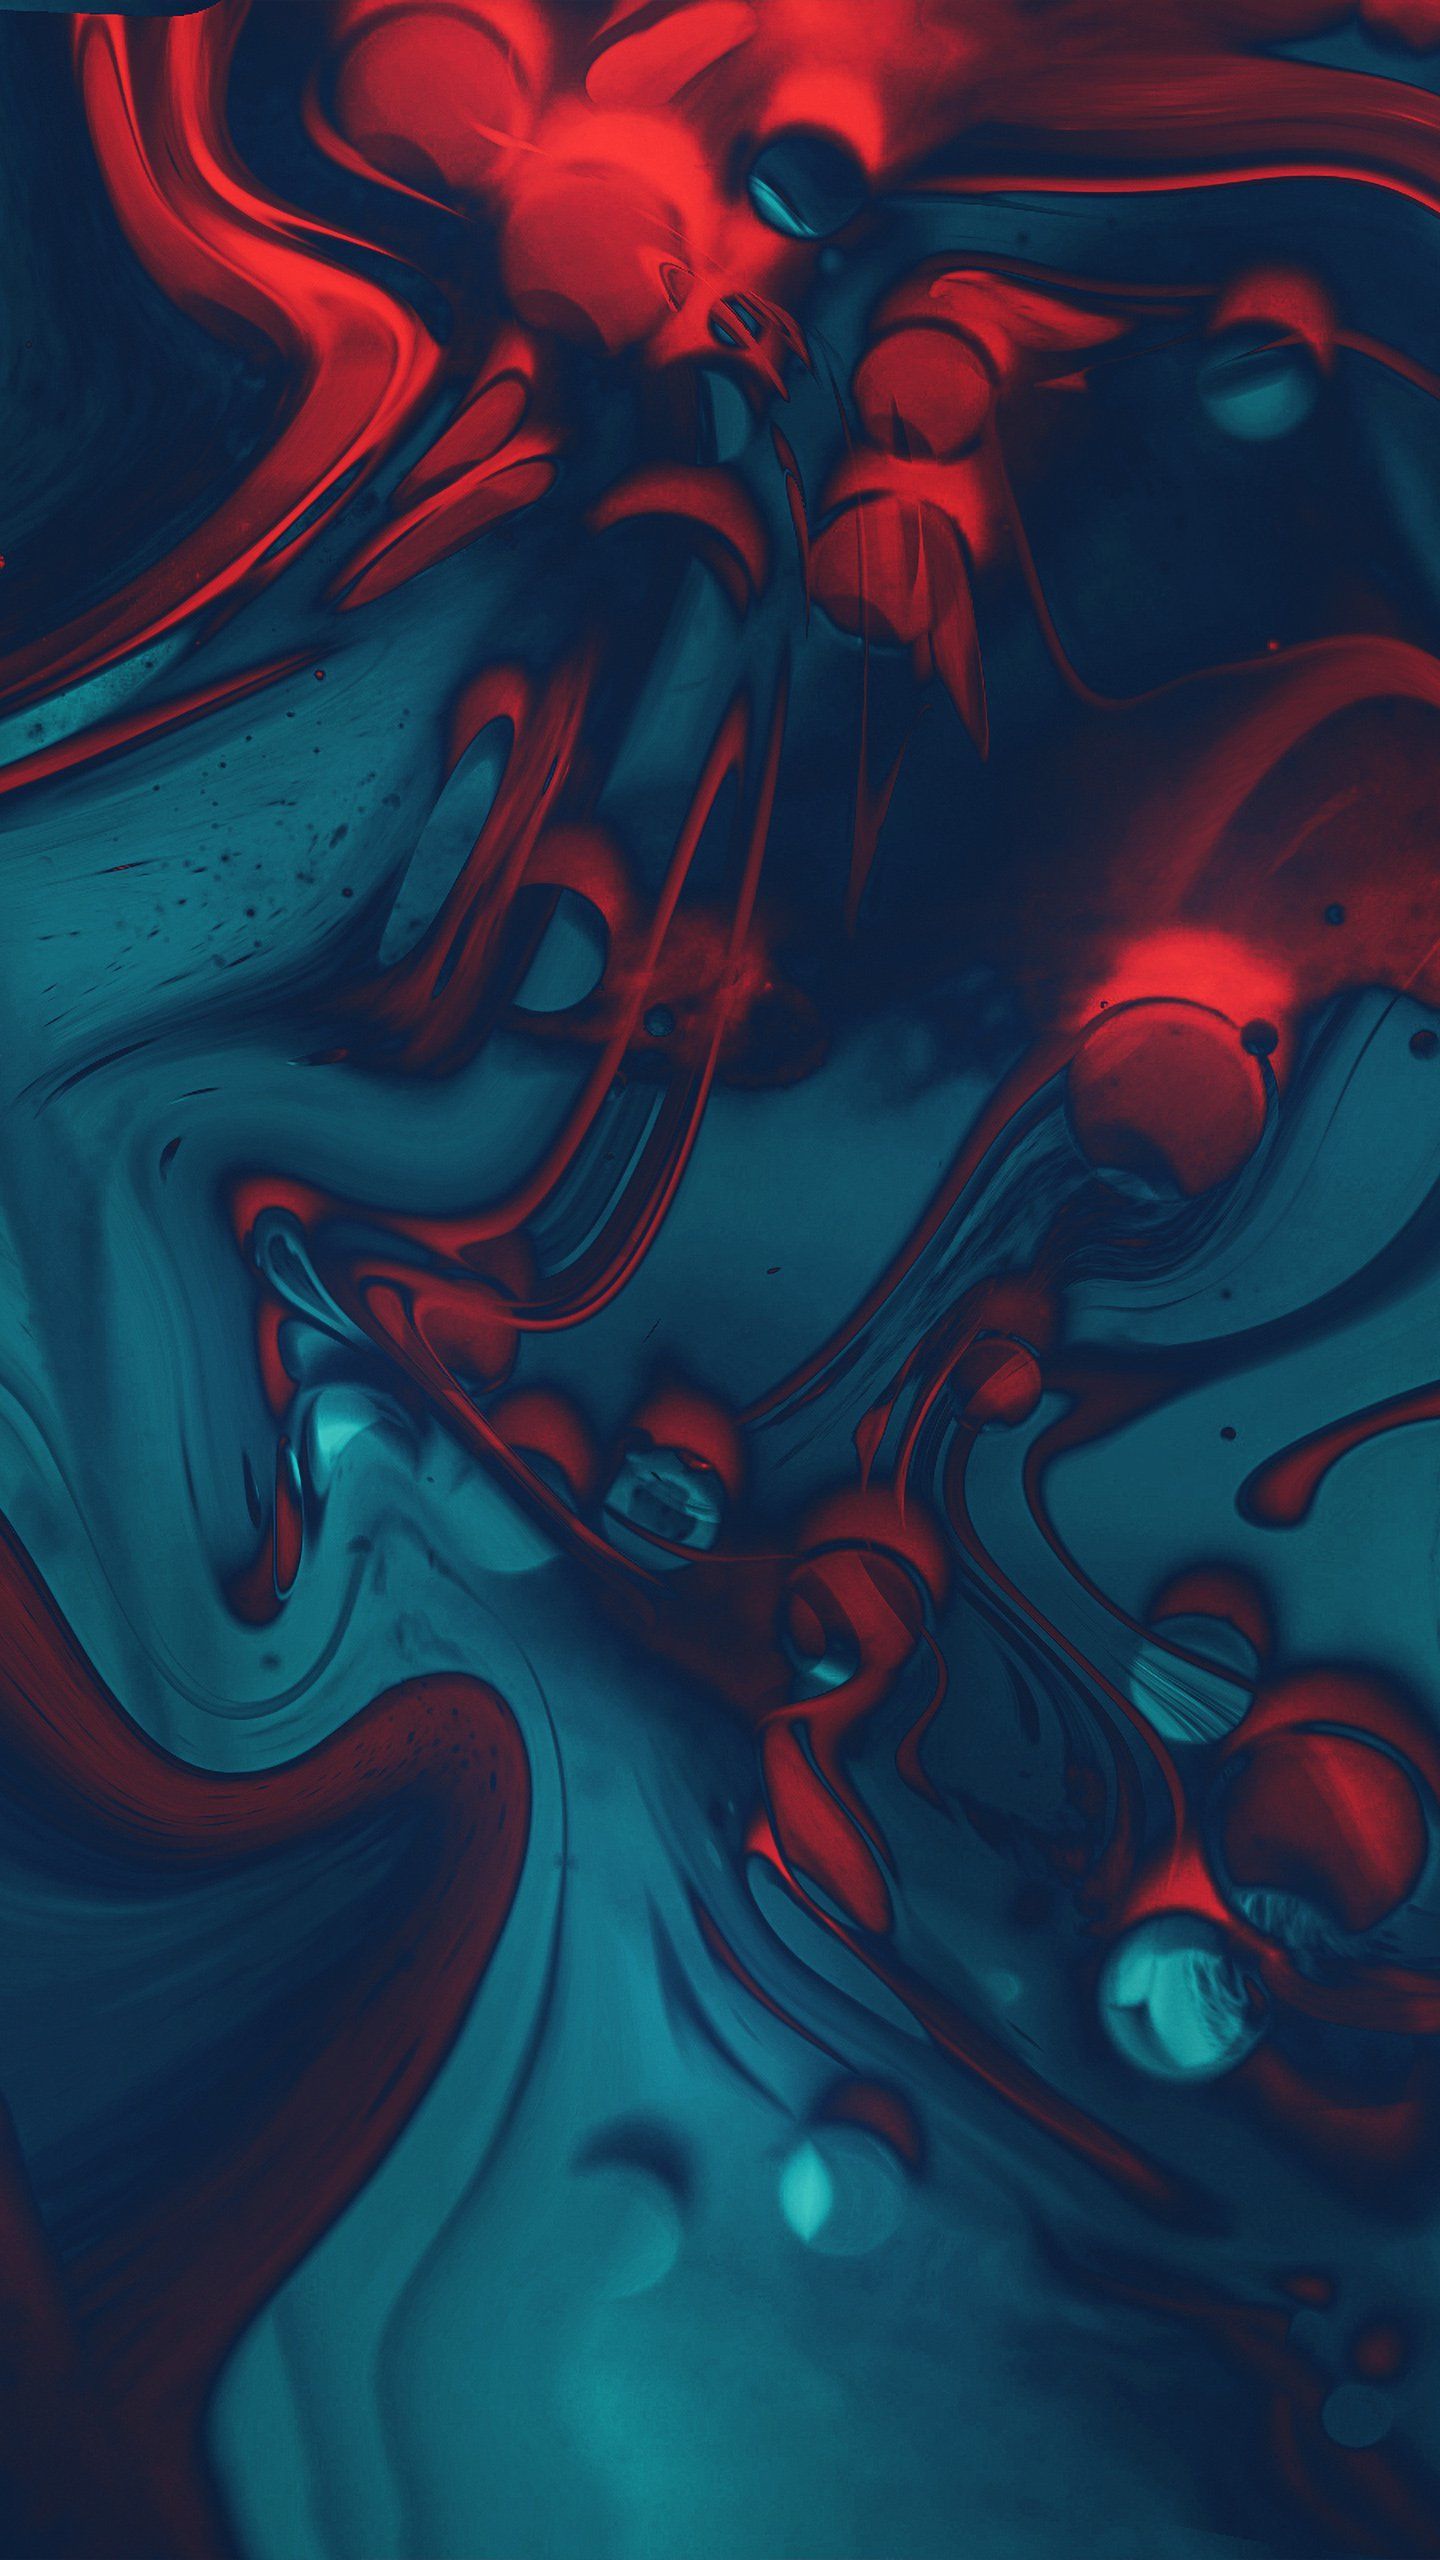 Red Blue Abstract. Abstract Iphone Wallpaper, Art Wallpaper Iphone, Abstract Wallpaper